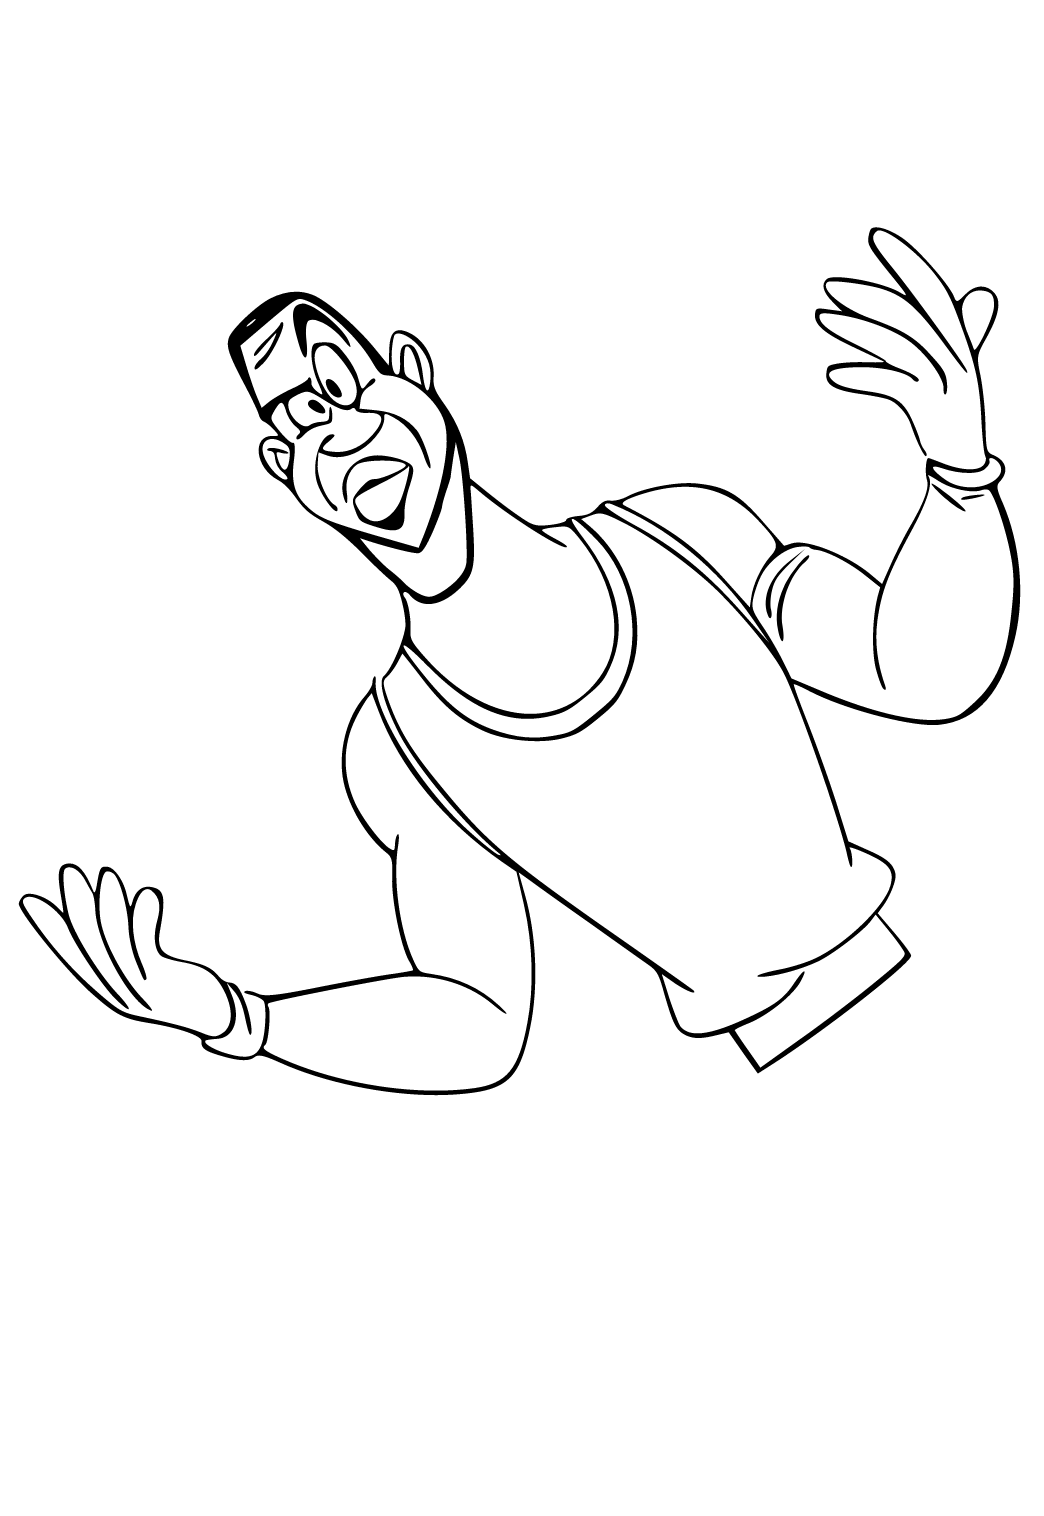 Free printable lebron james doubt coloring page for adults and kids